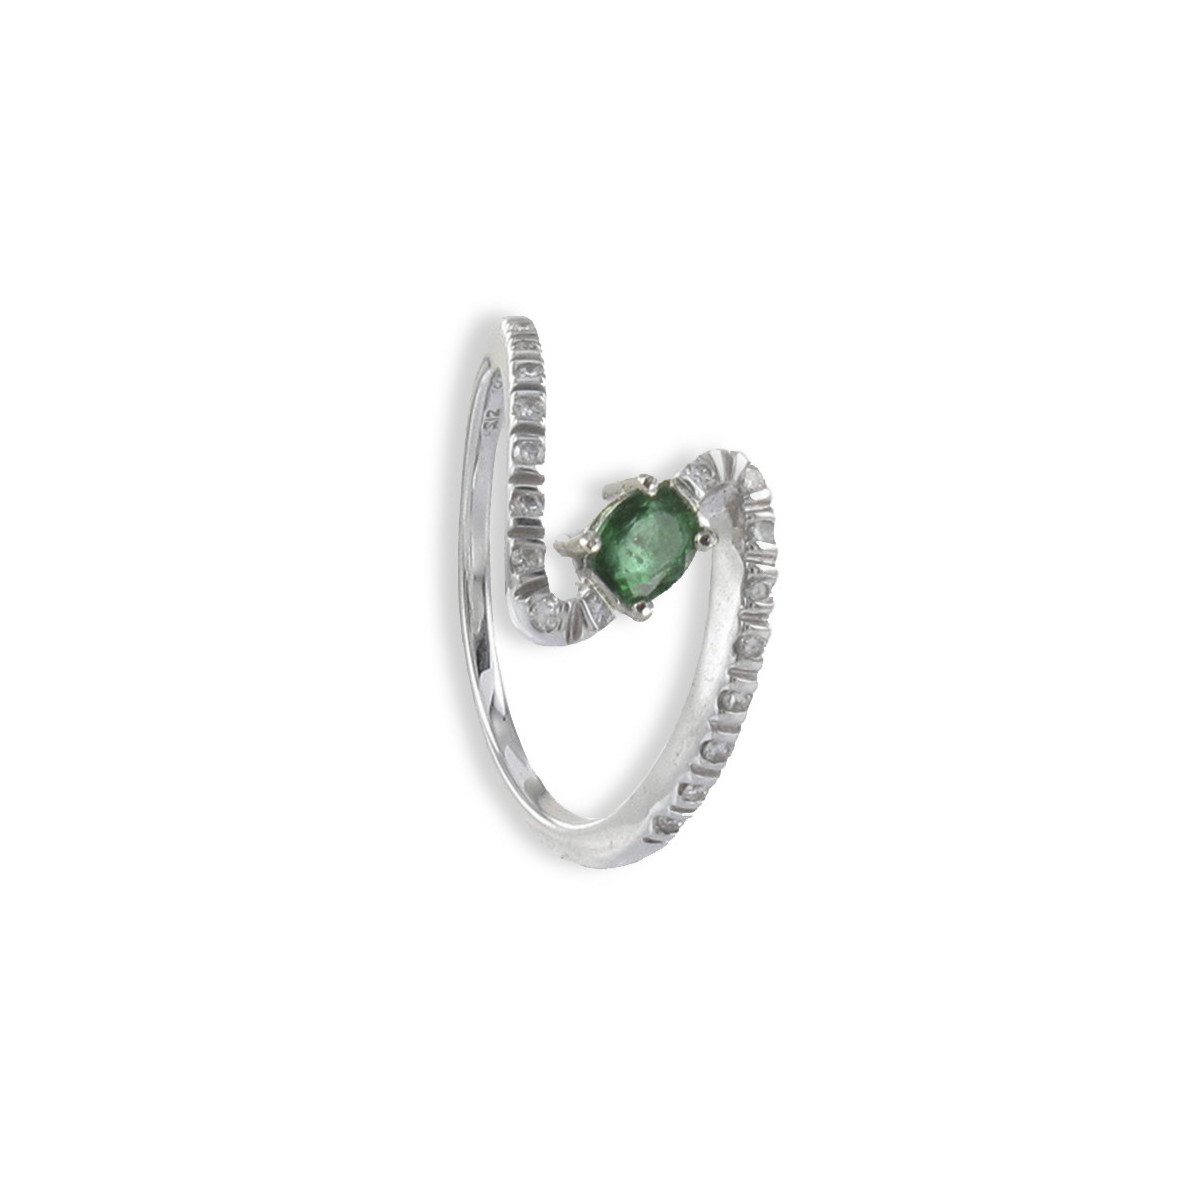 GOLD EMERALD AND 18 DIAMONDS RING